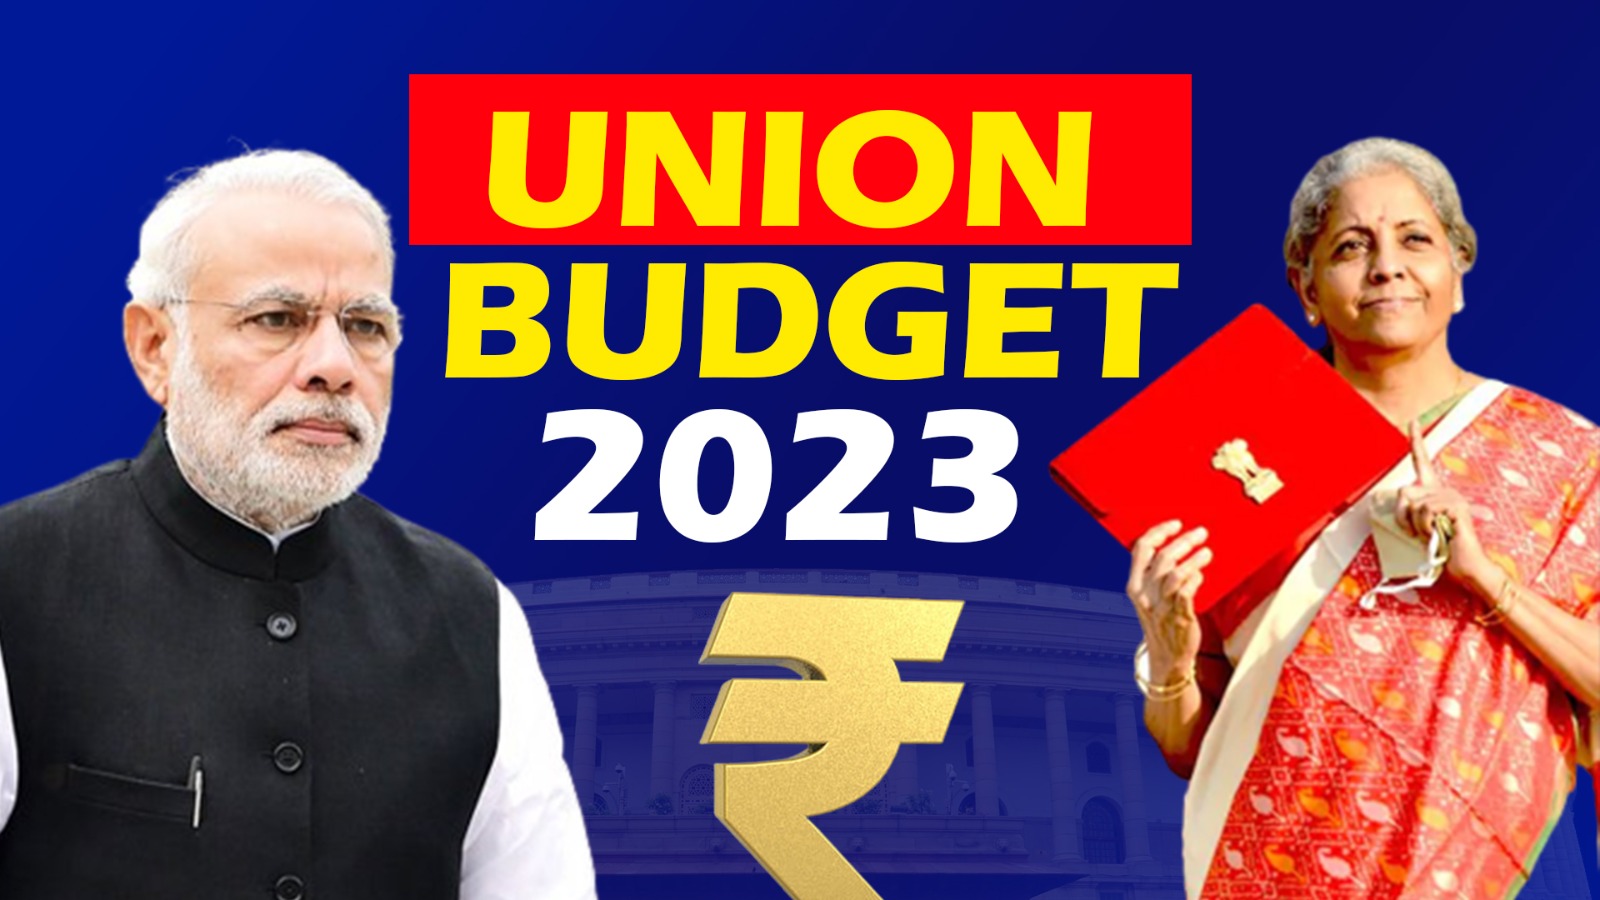 Budget 2023 LIVE Updates: Agriculture loan 20 lakh crore, fishing 6000 crore